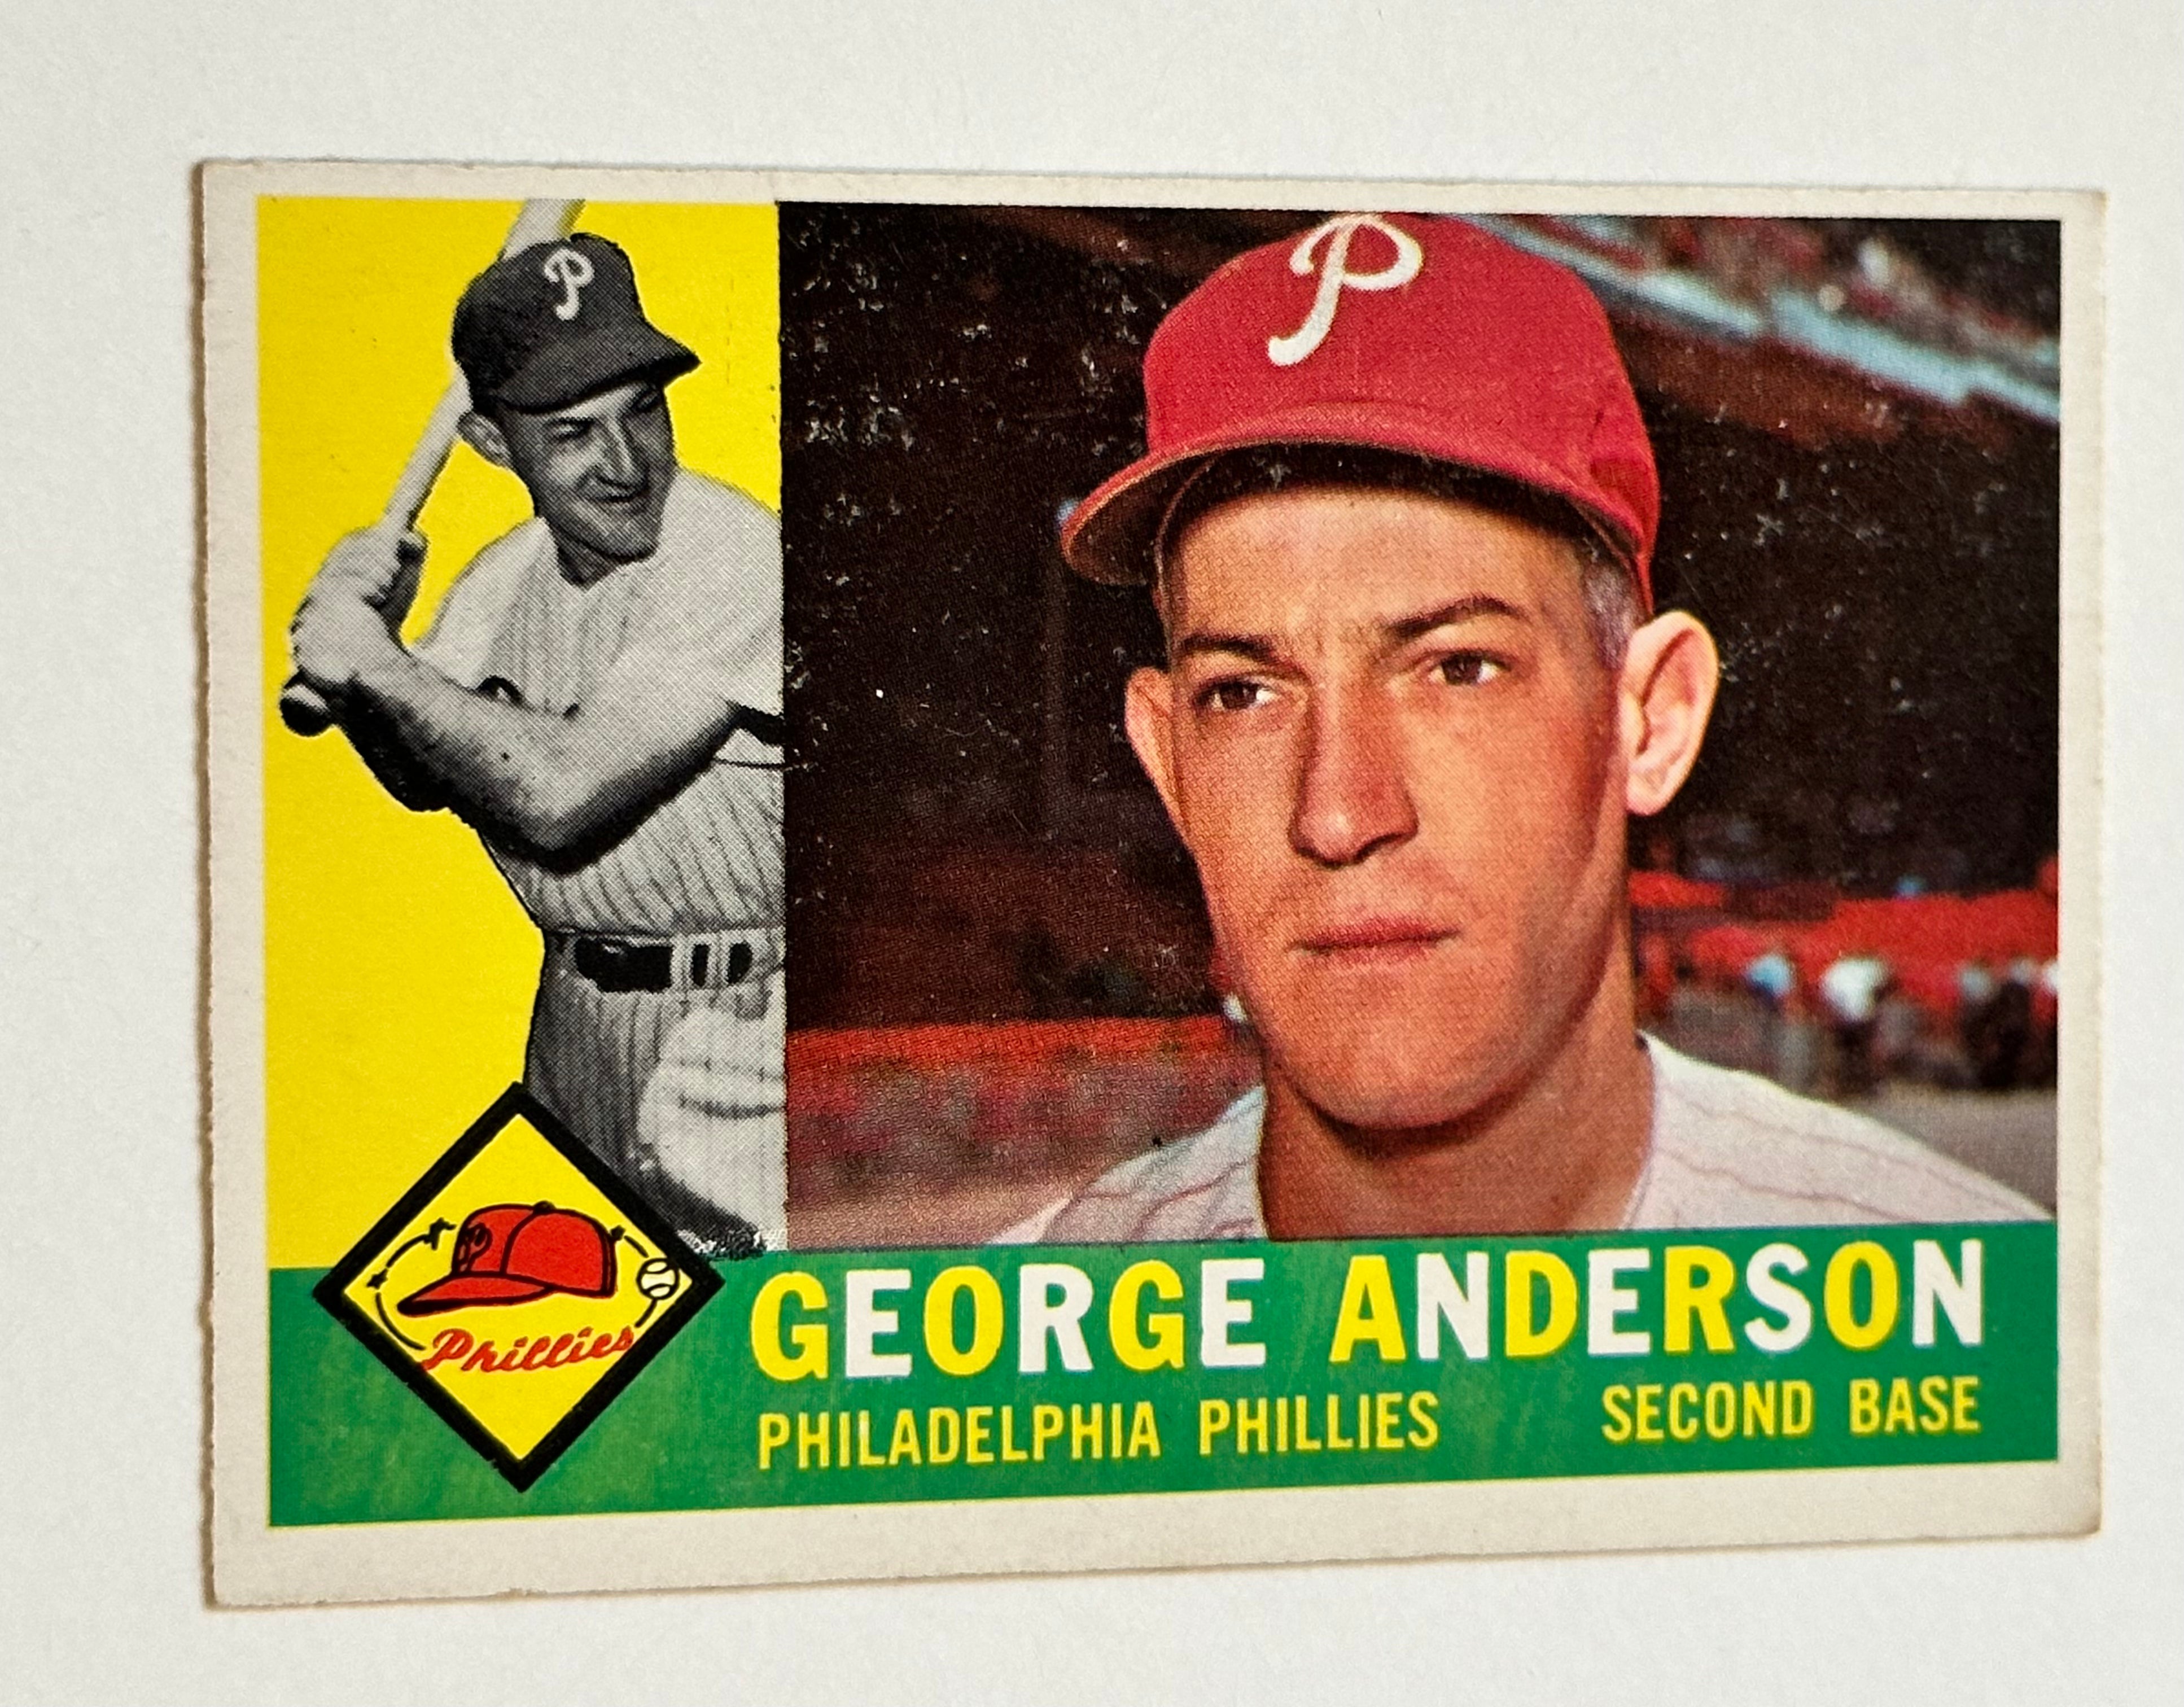 Sparky Anderson Topps ex condition baseball card 1960